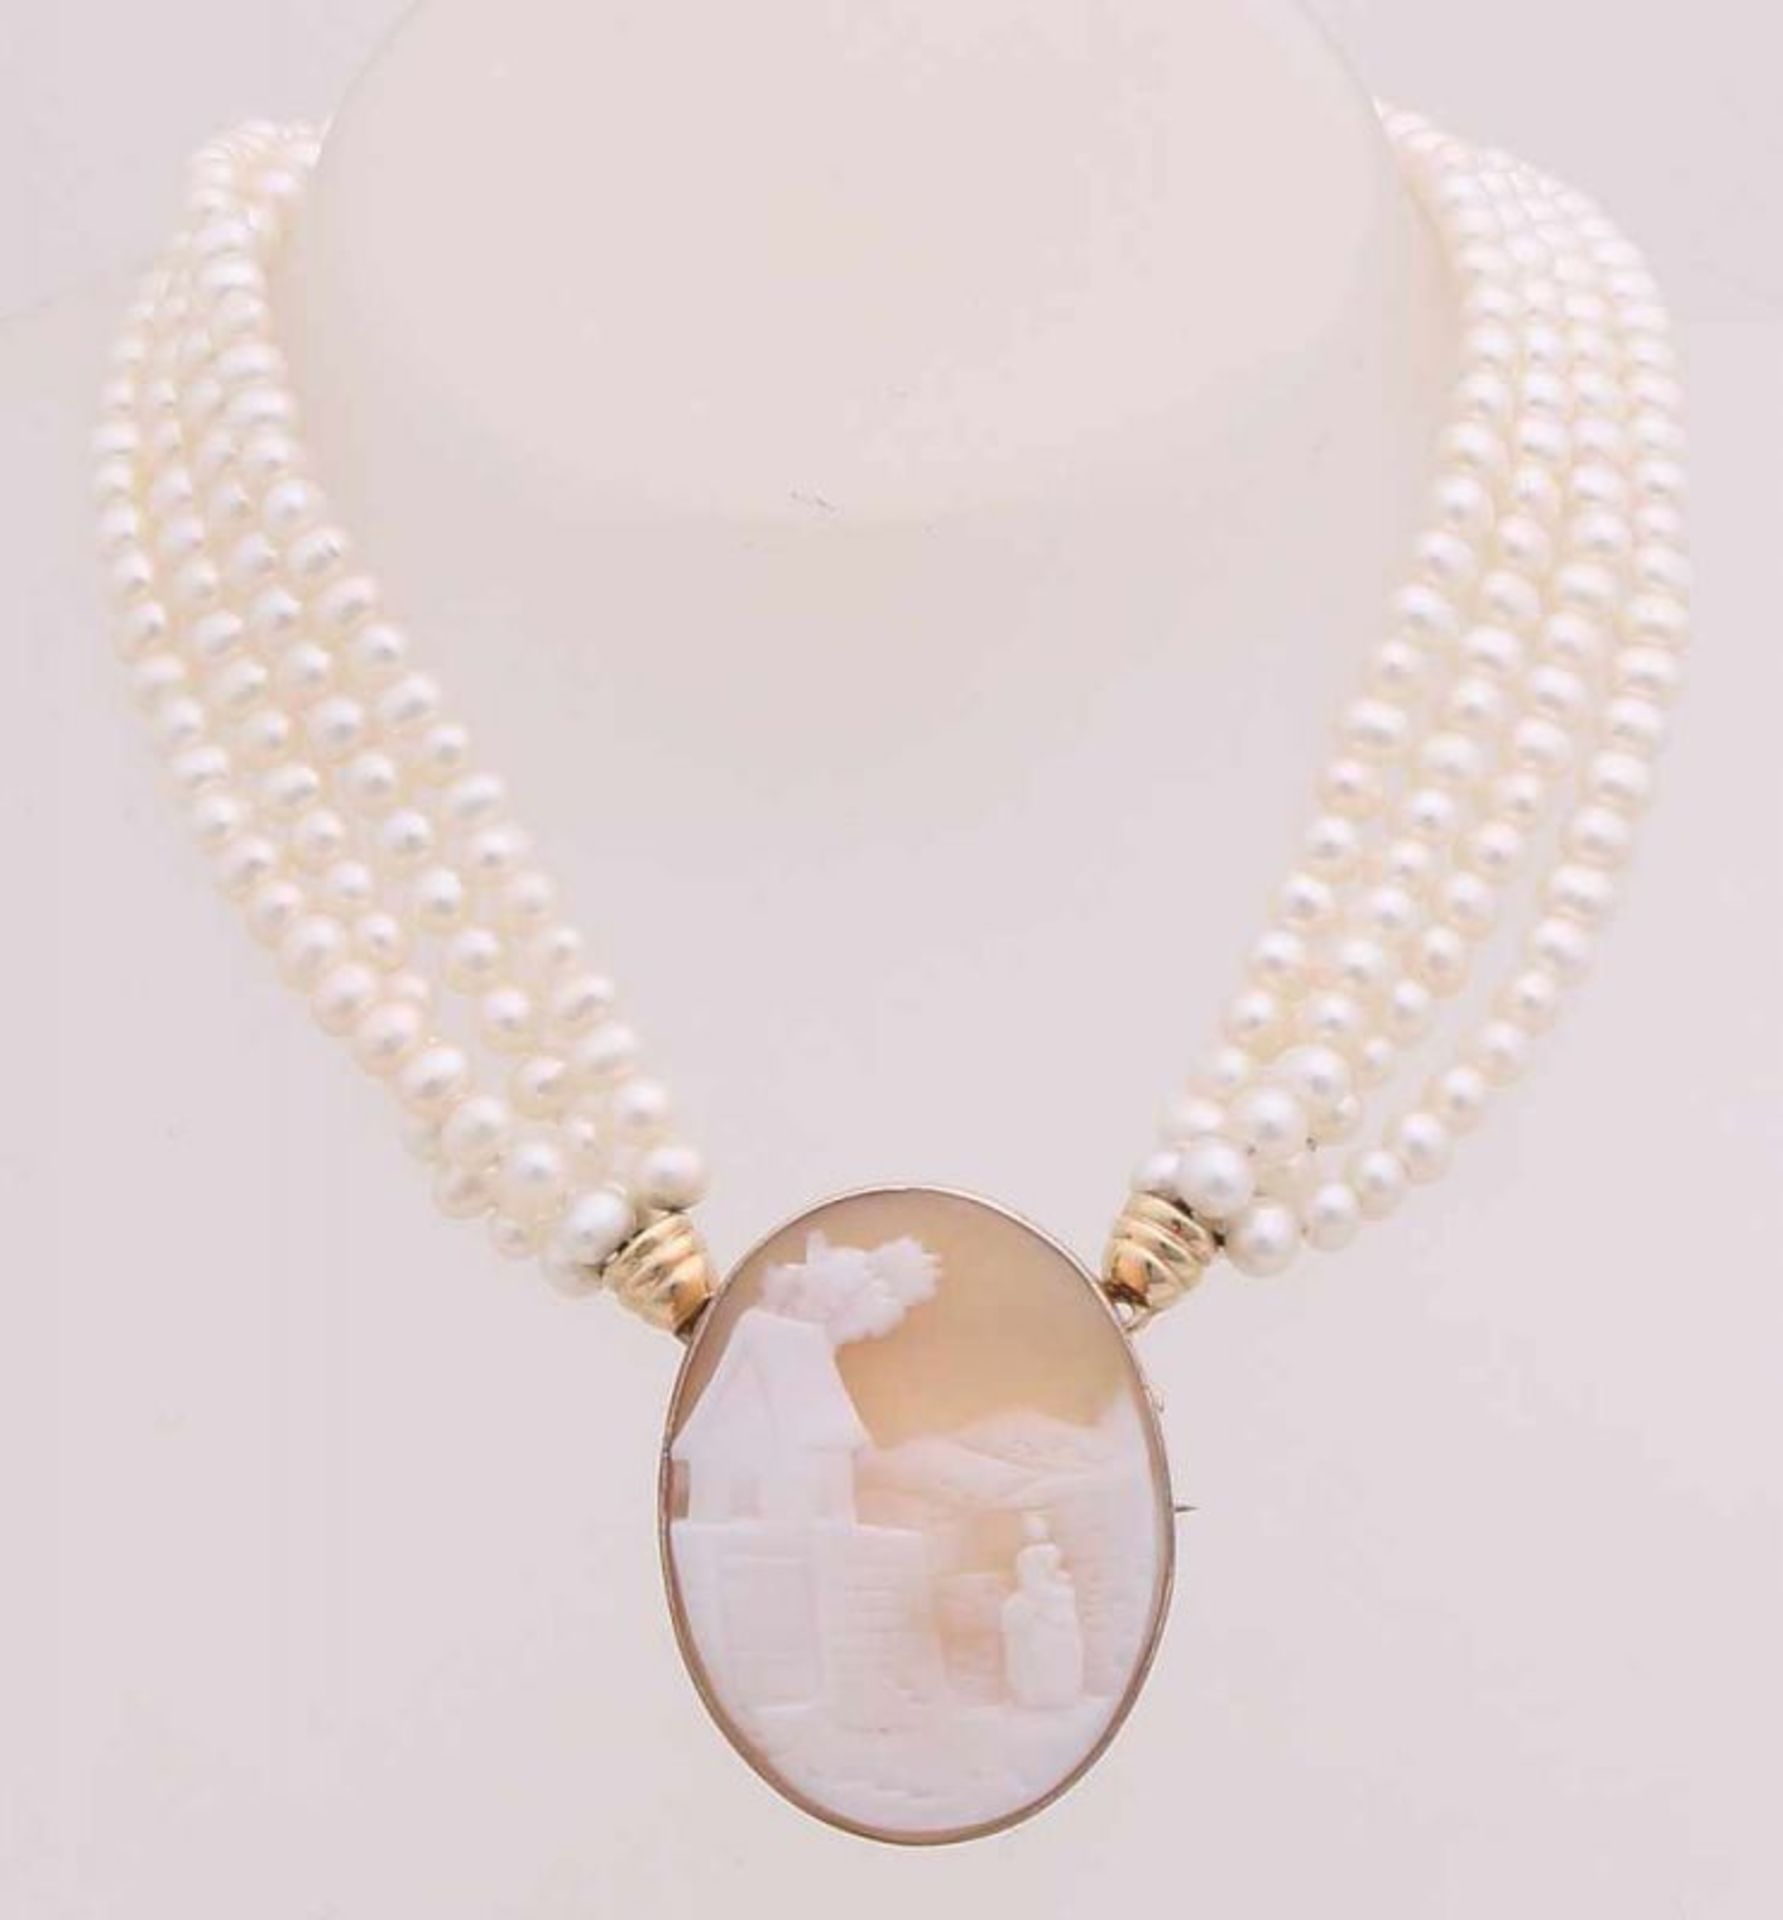 Pearl necklace with golden cameo brooch / clasp, 585/000. Necklace of 4 rows of freshwater pearls, ø